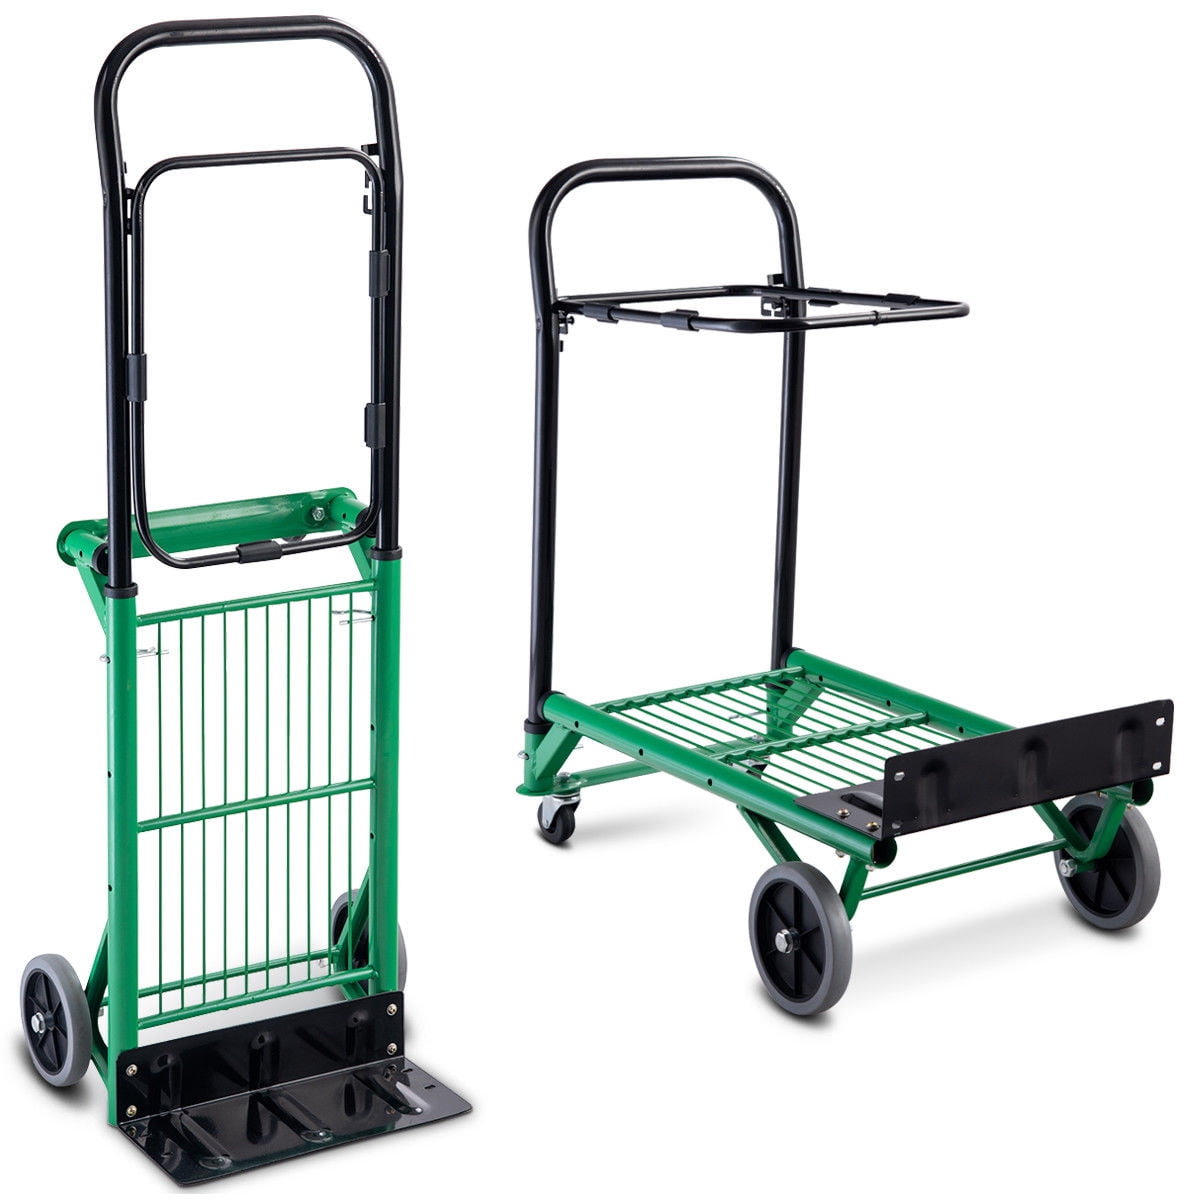 Details about   Lightweight 400 lb Capacity Folding Hand Truck Cart Moving Dolly Heave Duty New 